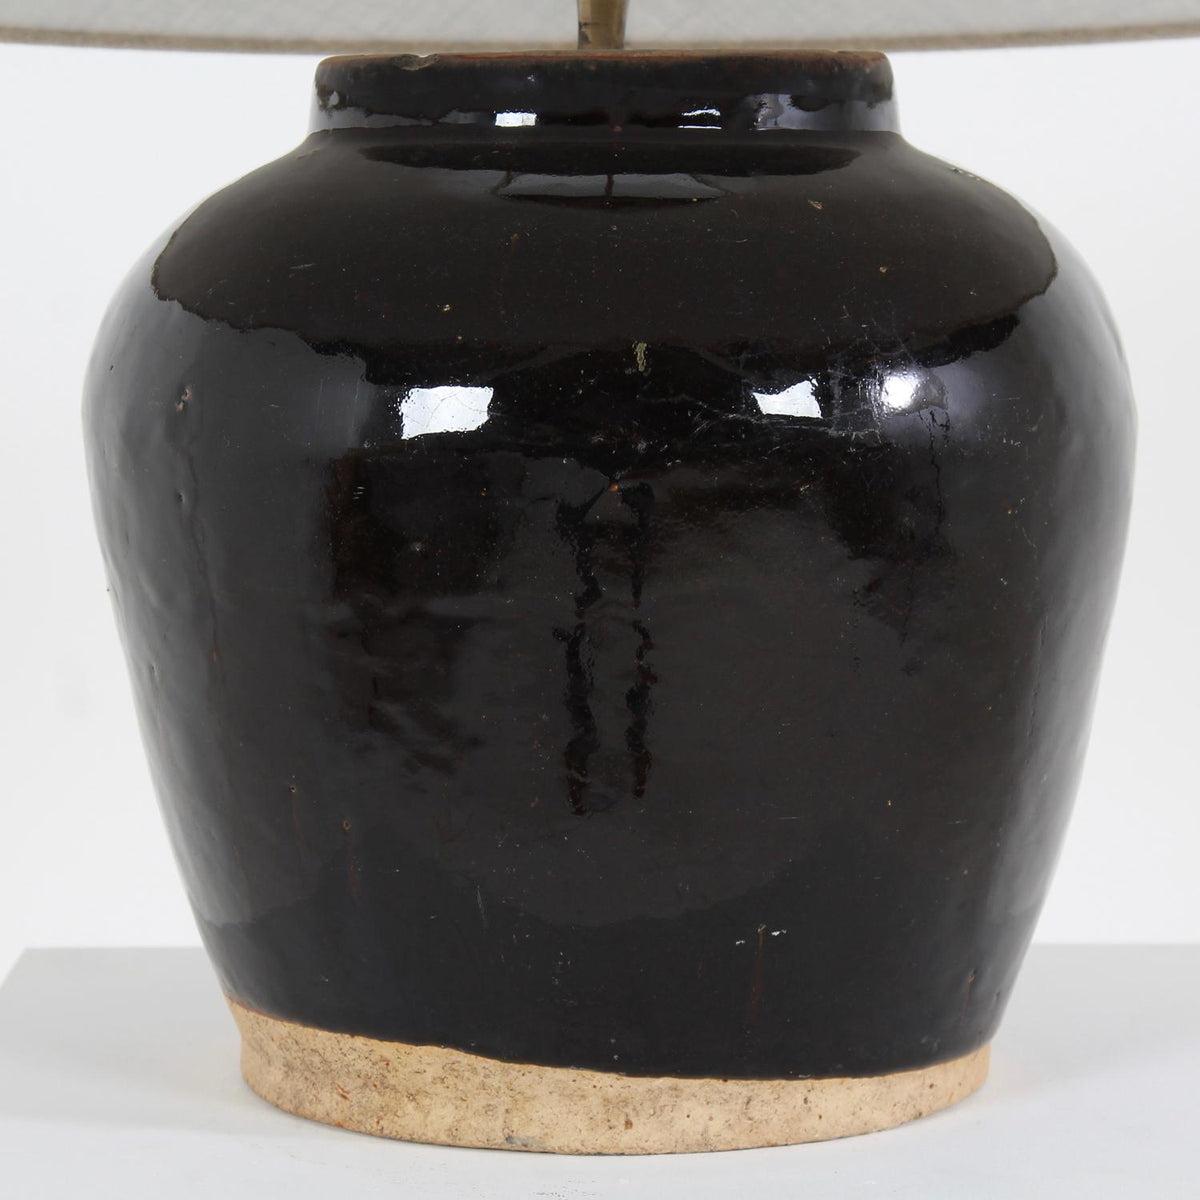 CHINESE BLACK GLAZED WATER POT TABLE LAMP WITH BELGIUM LINEN EMPIRE SHADE